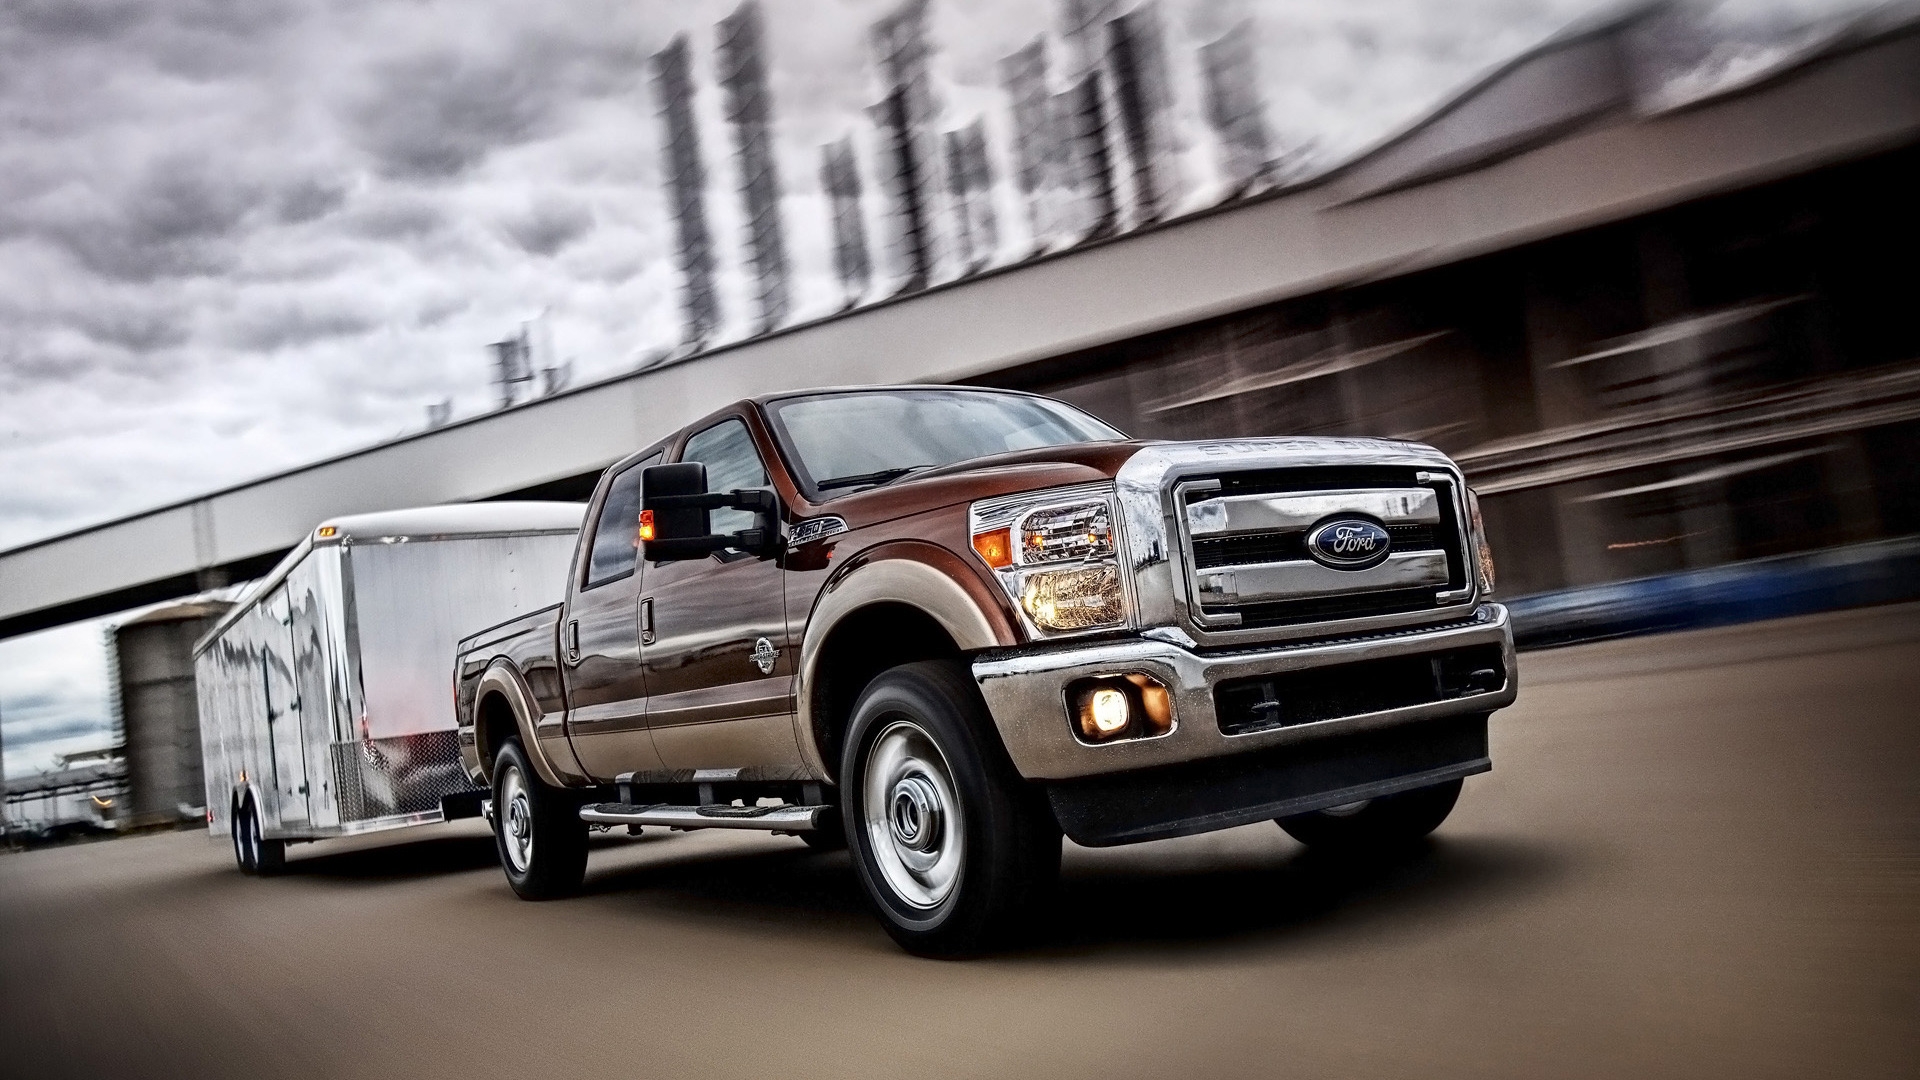 2011 Ford F-Series Super Duty Speed for 1920 x 1080 HDTV 1080p resolution